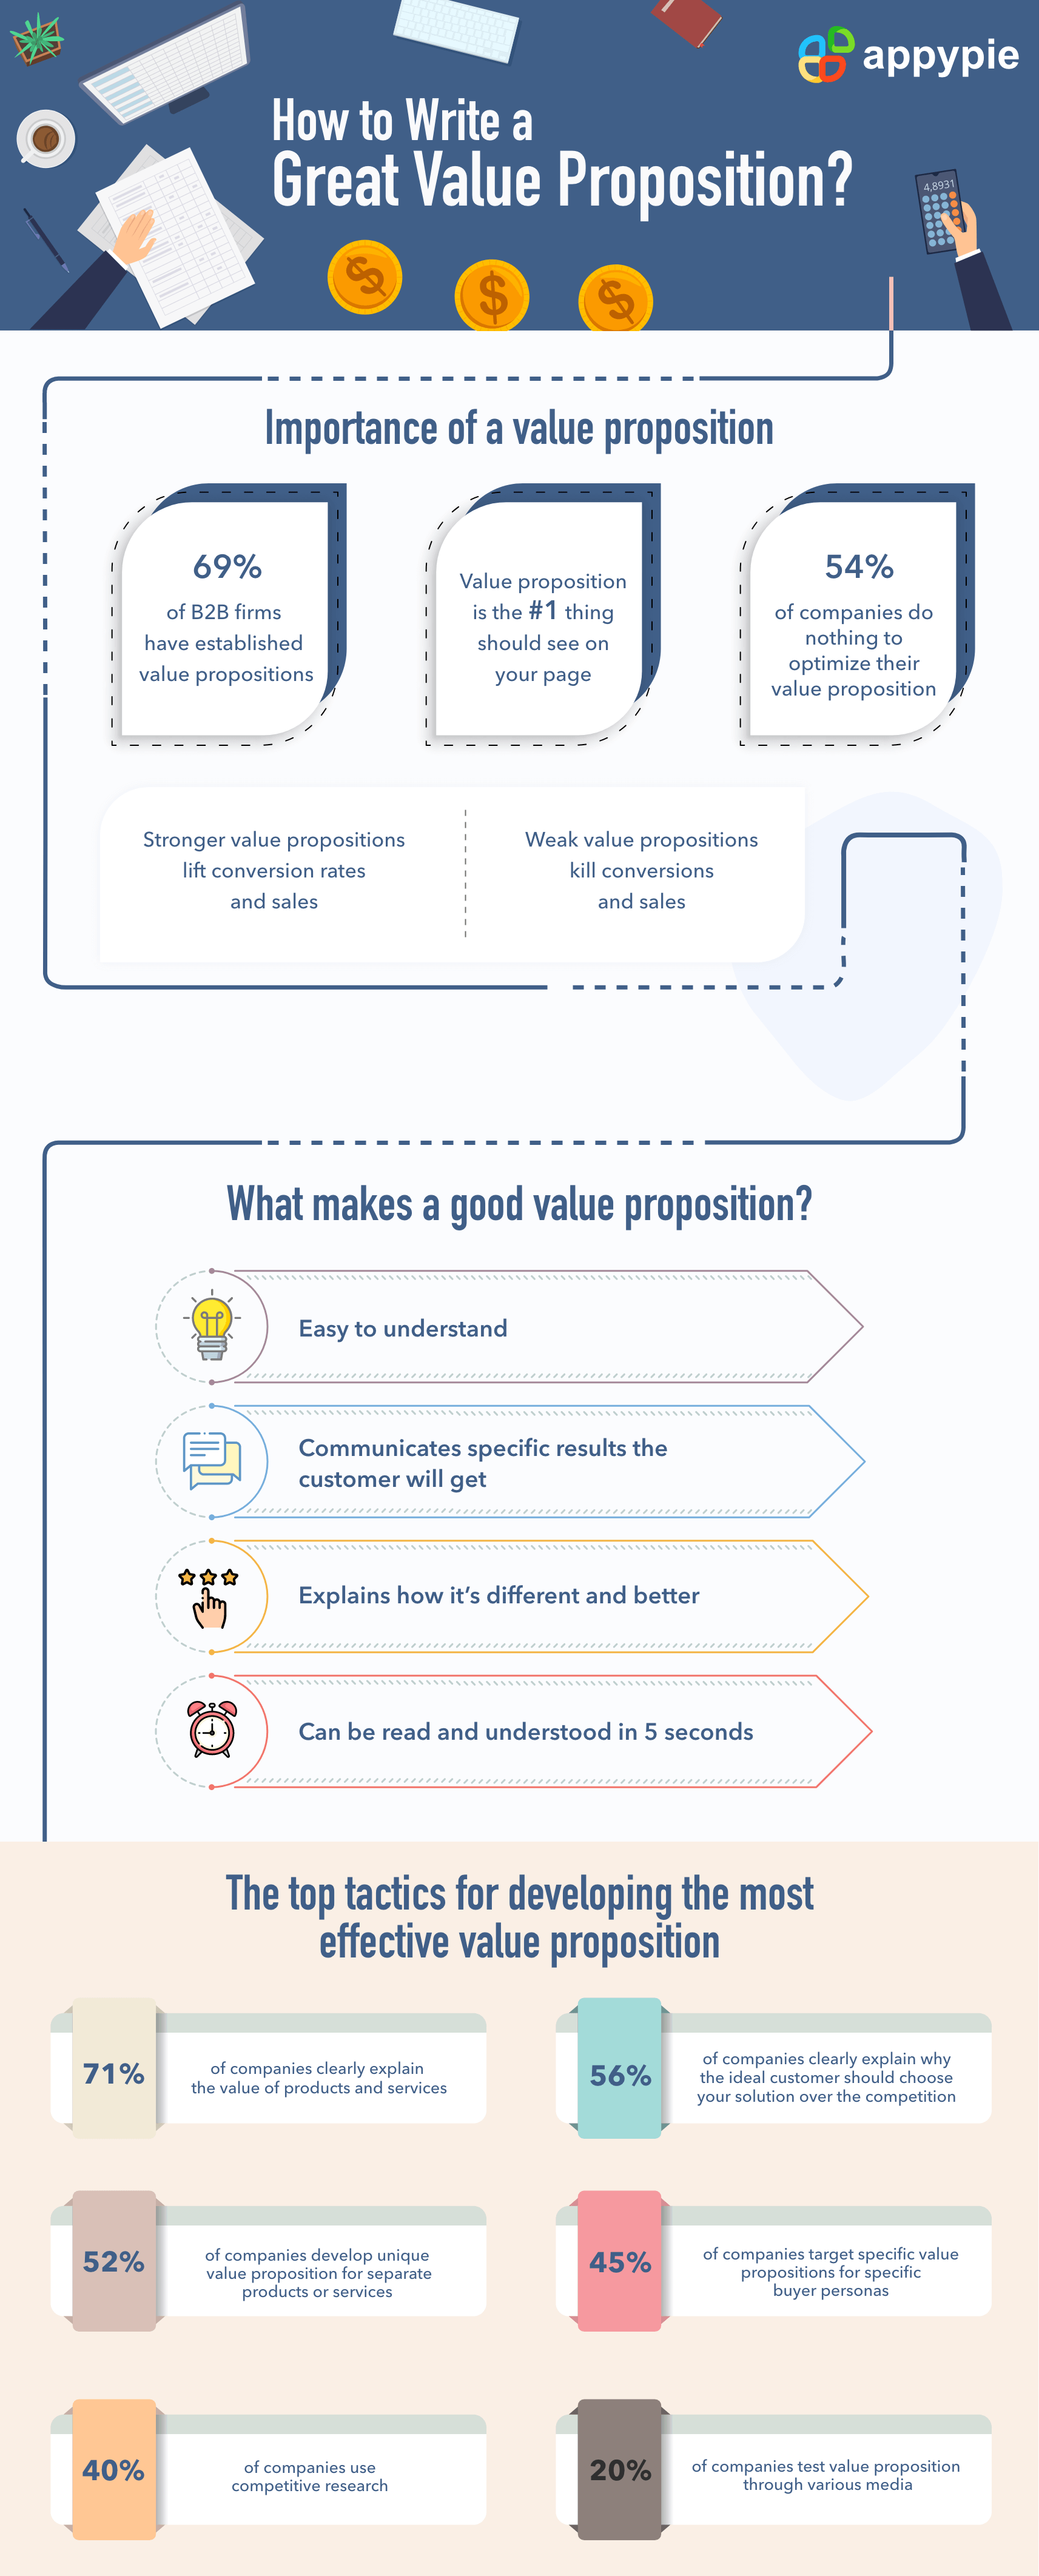 Appy Pie -How to Write a Good Value Proposition